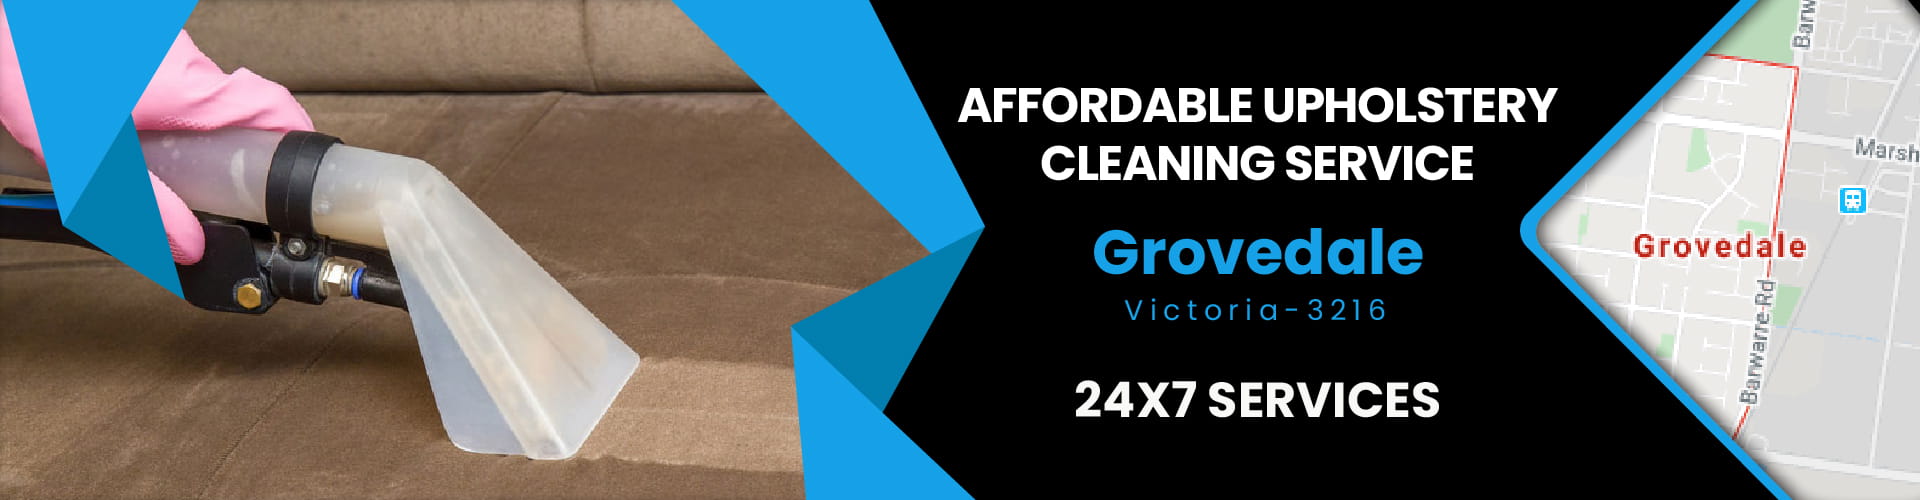 Upholstery Cleaning Grovedale